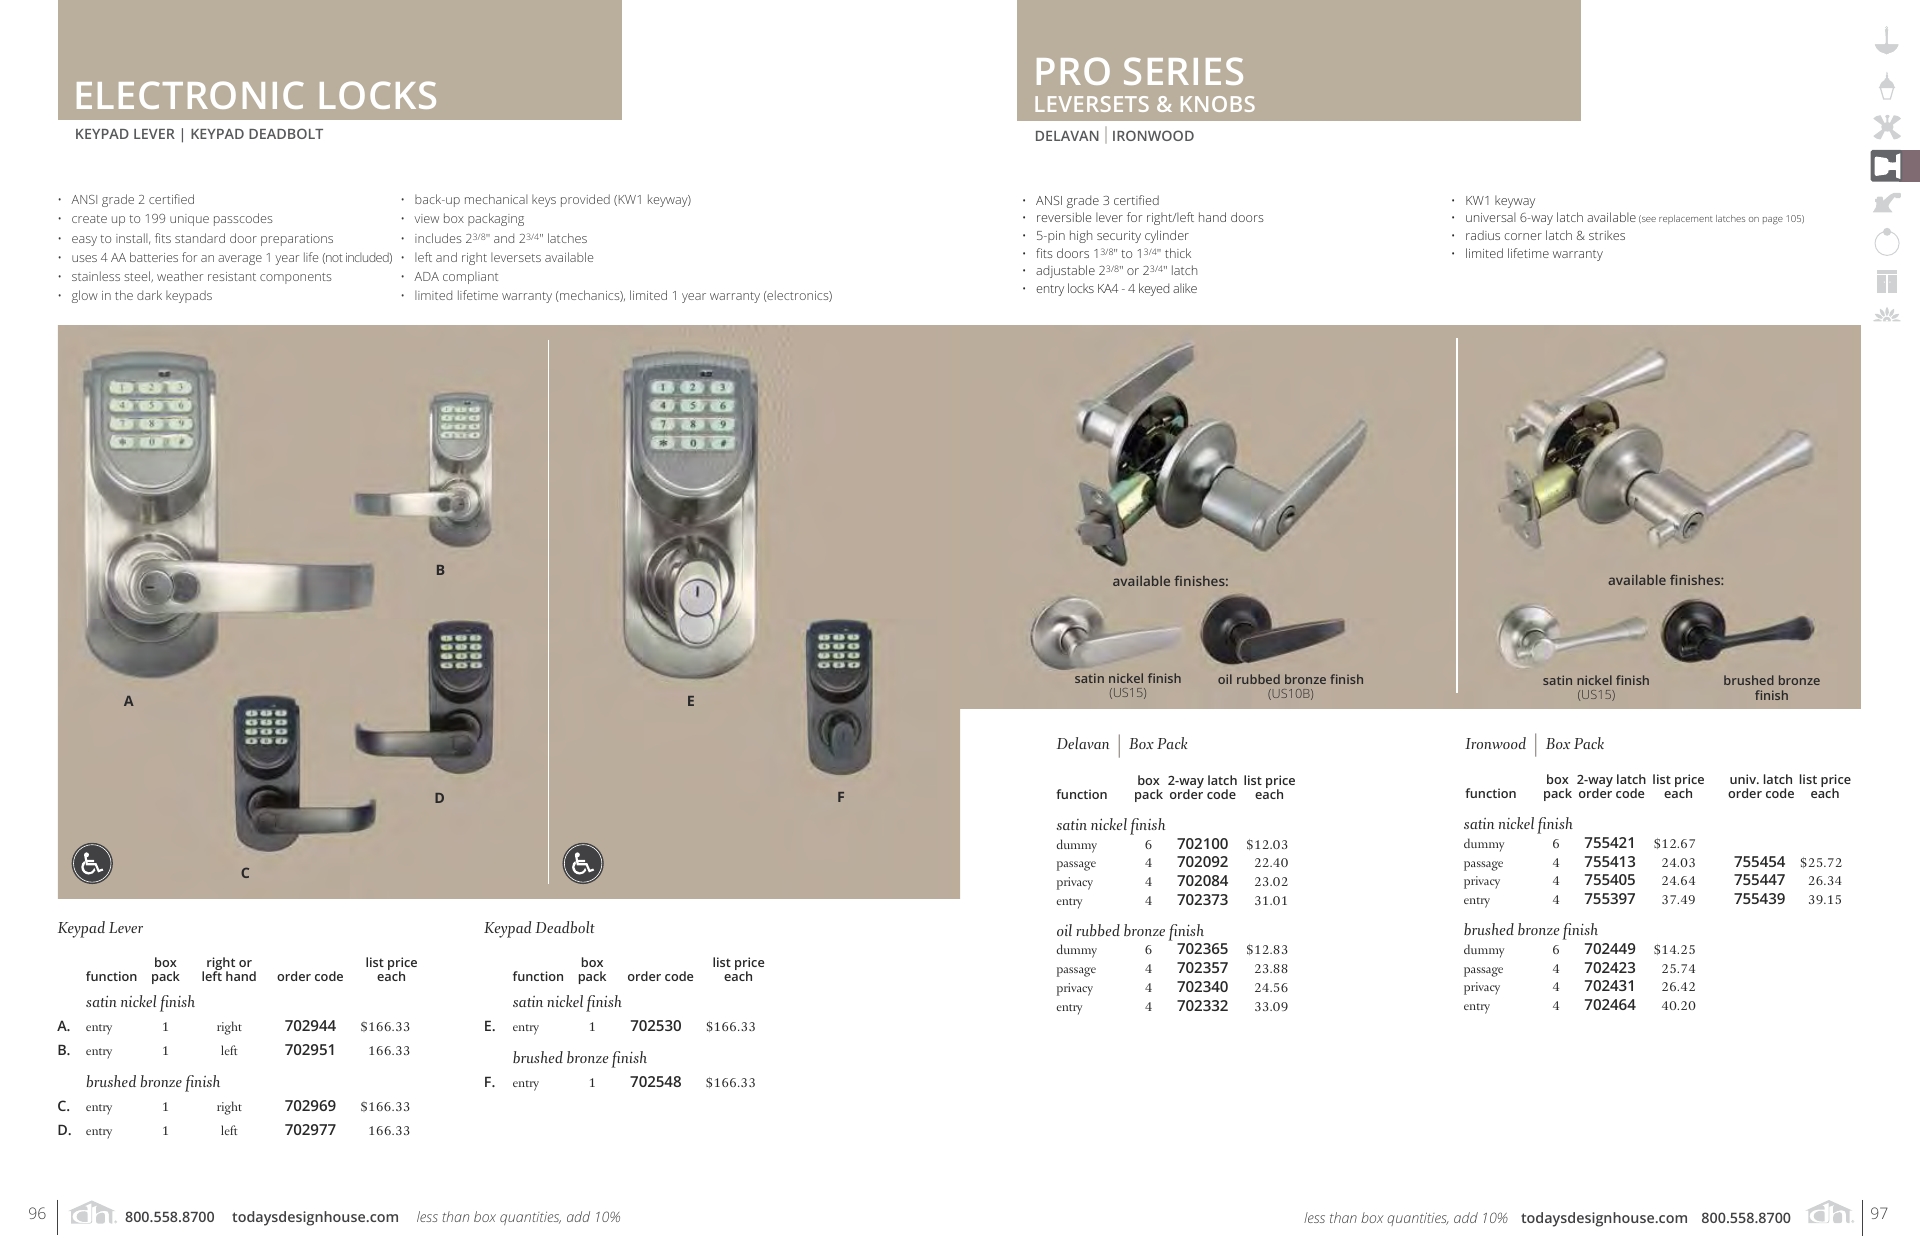 Electronic Locks and Pro Series Leversets & Knobs